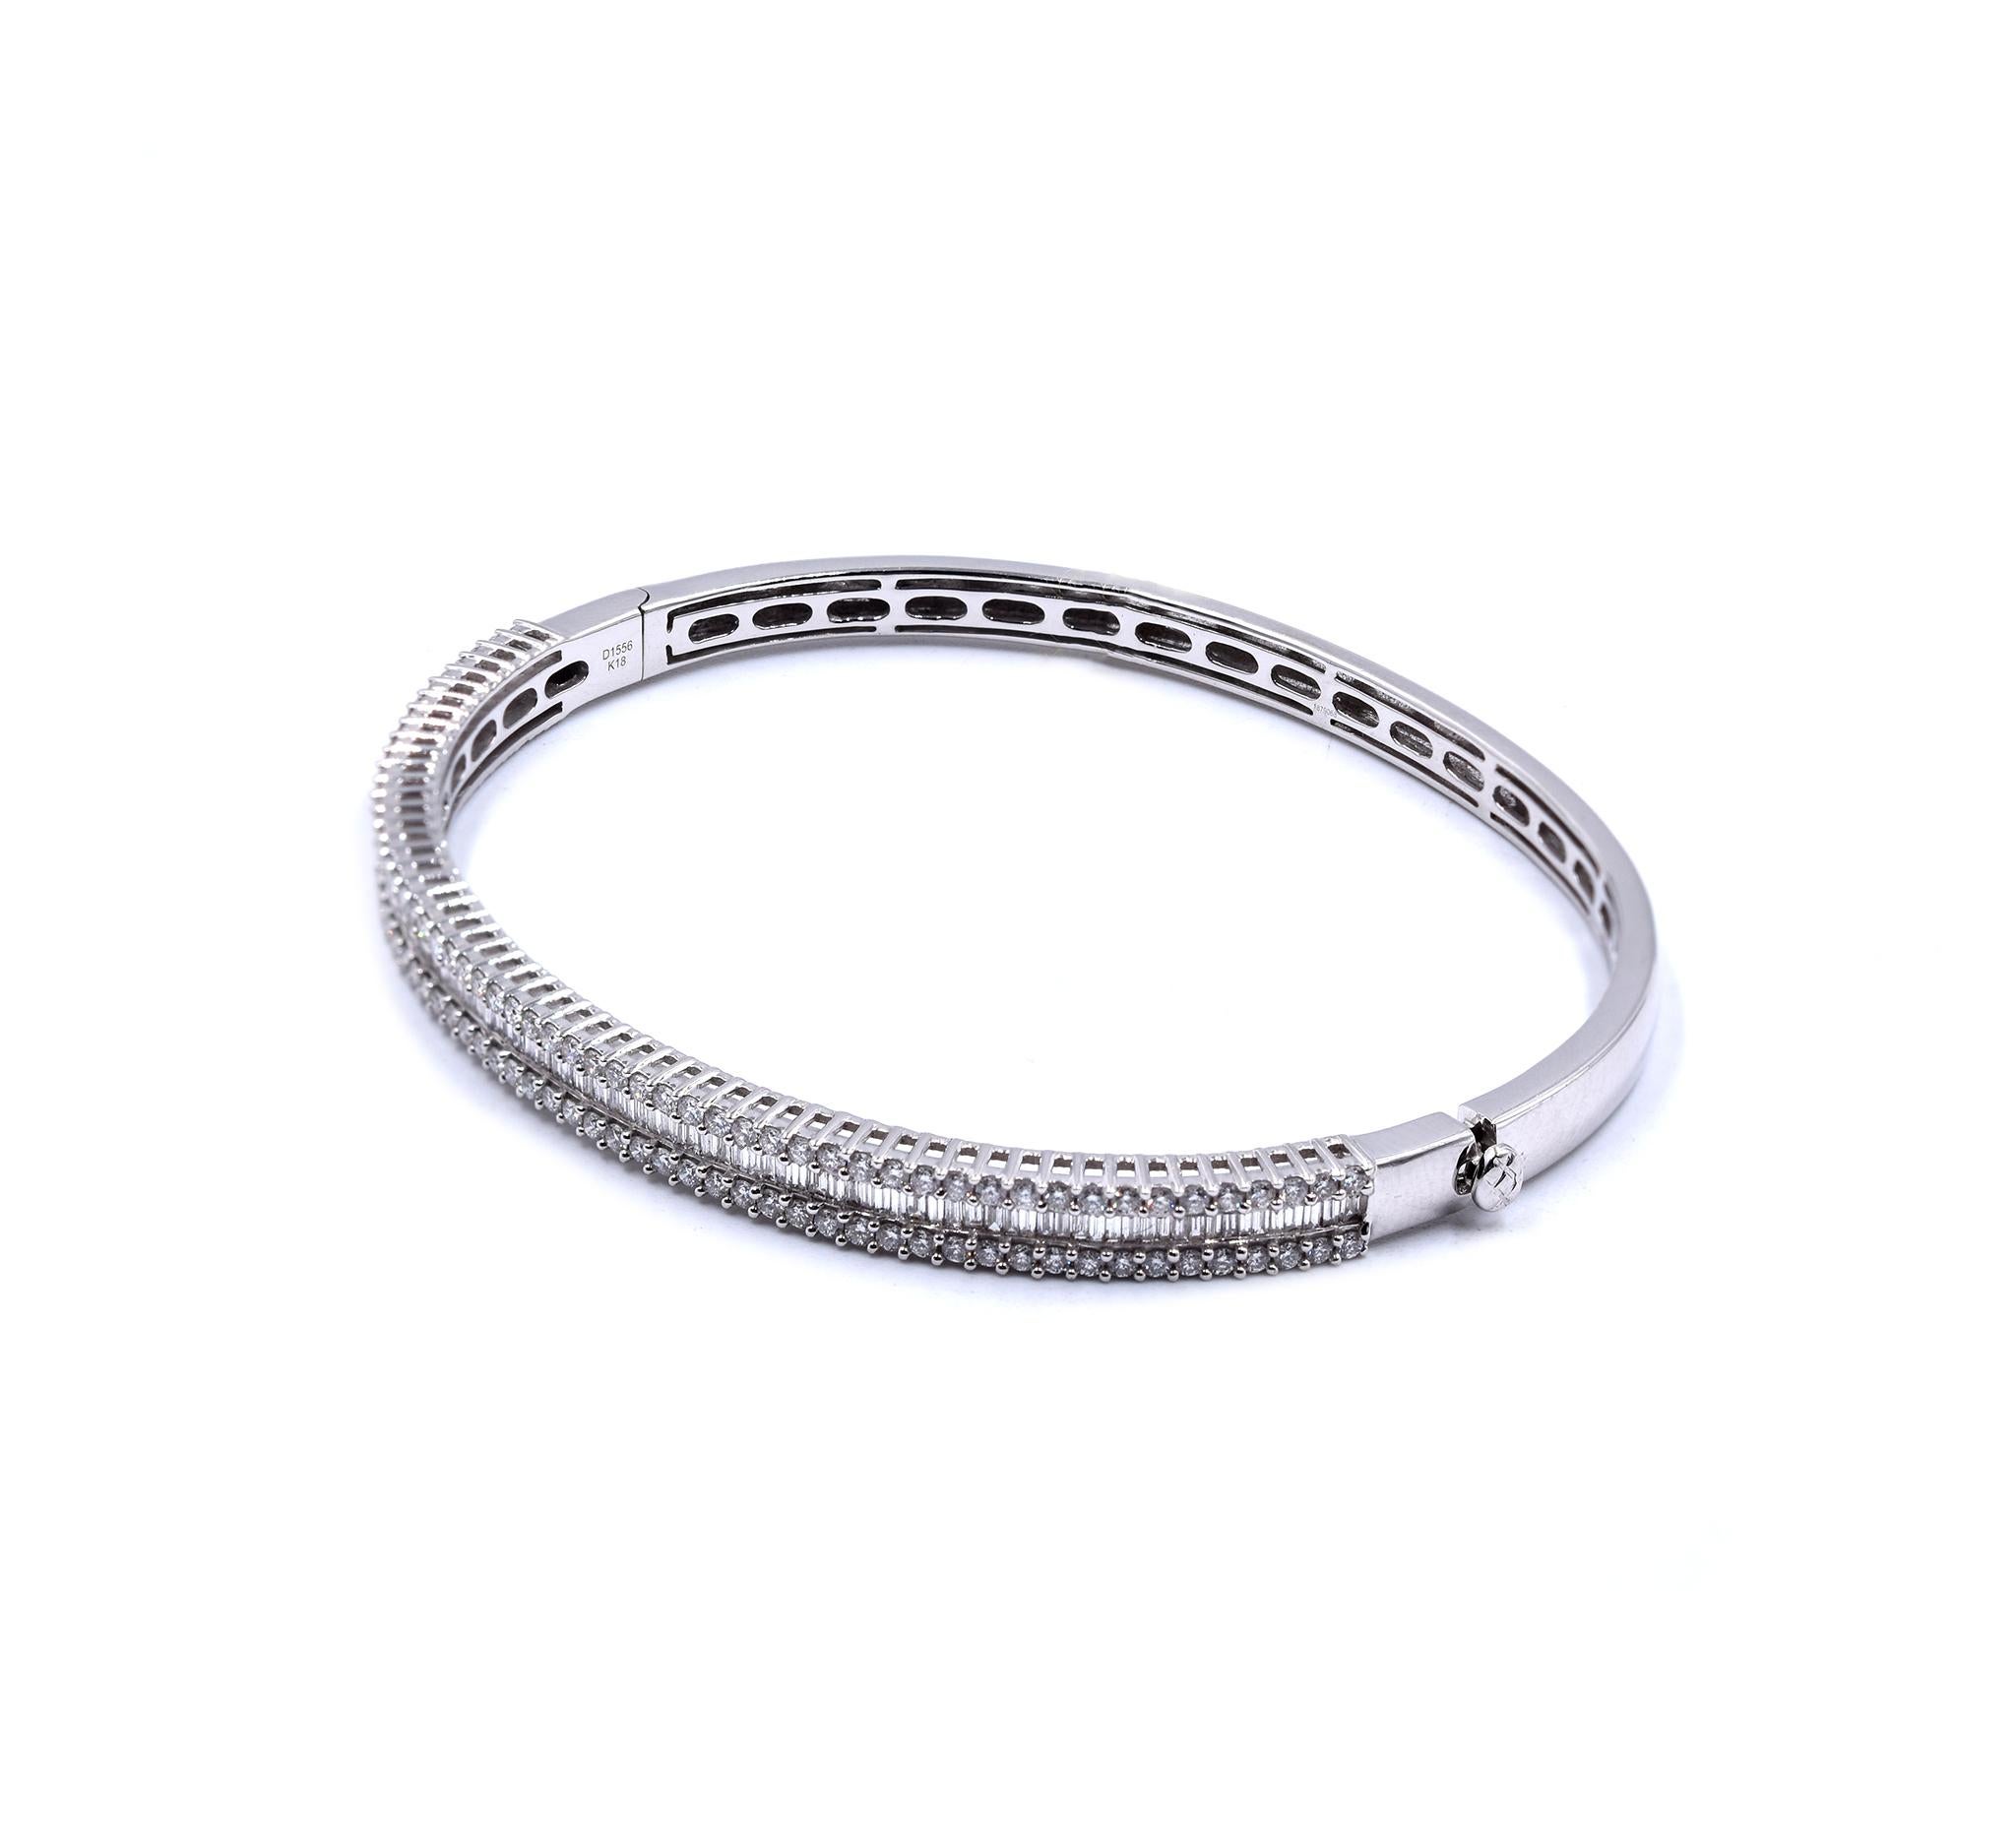 Designer: custom
Material: 18K white gold
Diamonds: 114 round brilliant cut = 1.03cttw
Color: G
Clarity: VS2
Diamonds: 99 baguette cut = .56cttw
Color: G
Clarity: VS2
Dimensions: bracelet will fit up to a 6.5-inch wrist
Weight: 14.27 grams
